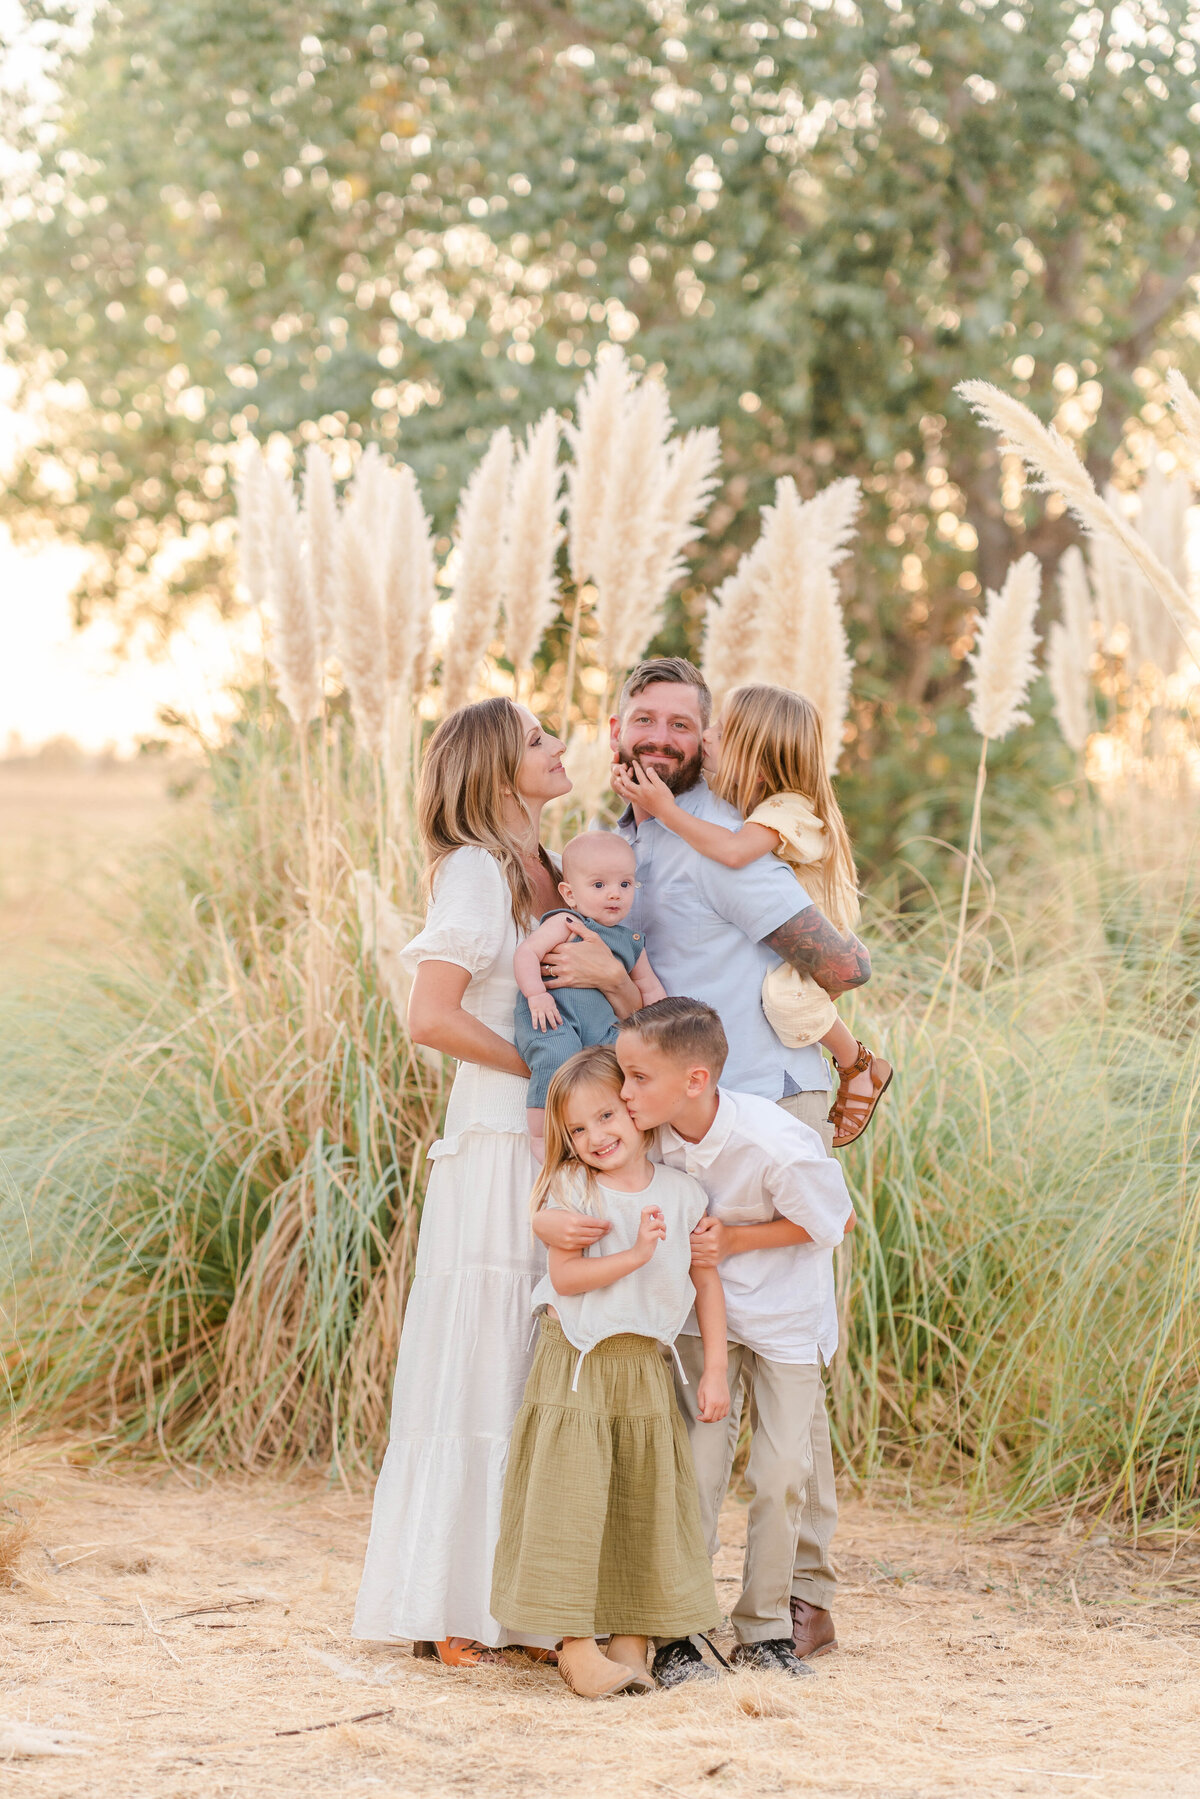 A family session photographed by Bay Area Photographer, Light Livin Photography shows a family standing together in a field of pampas grass.